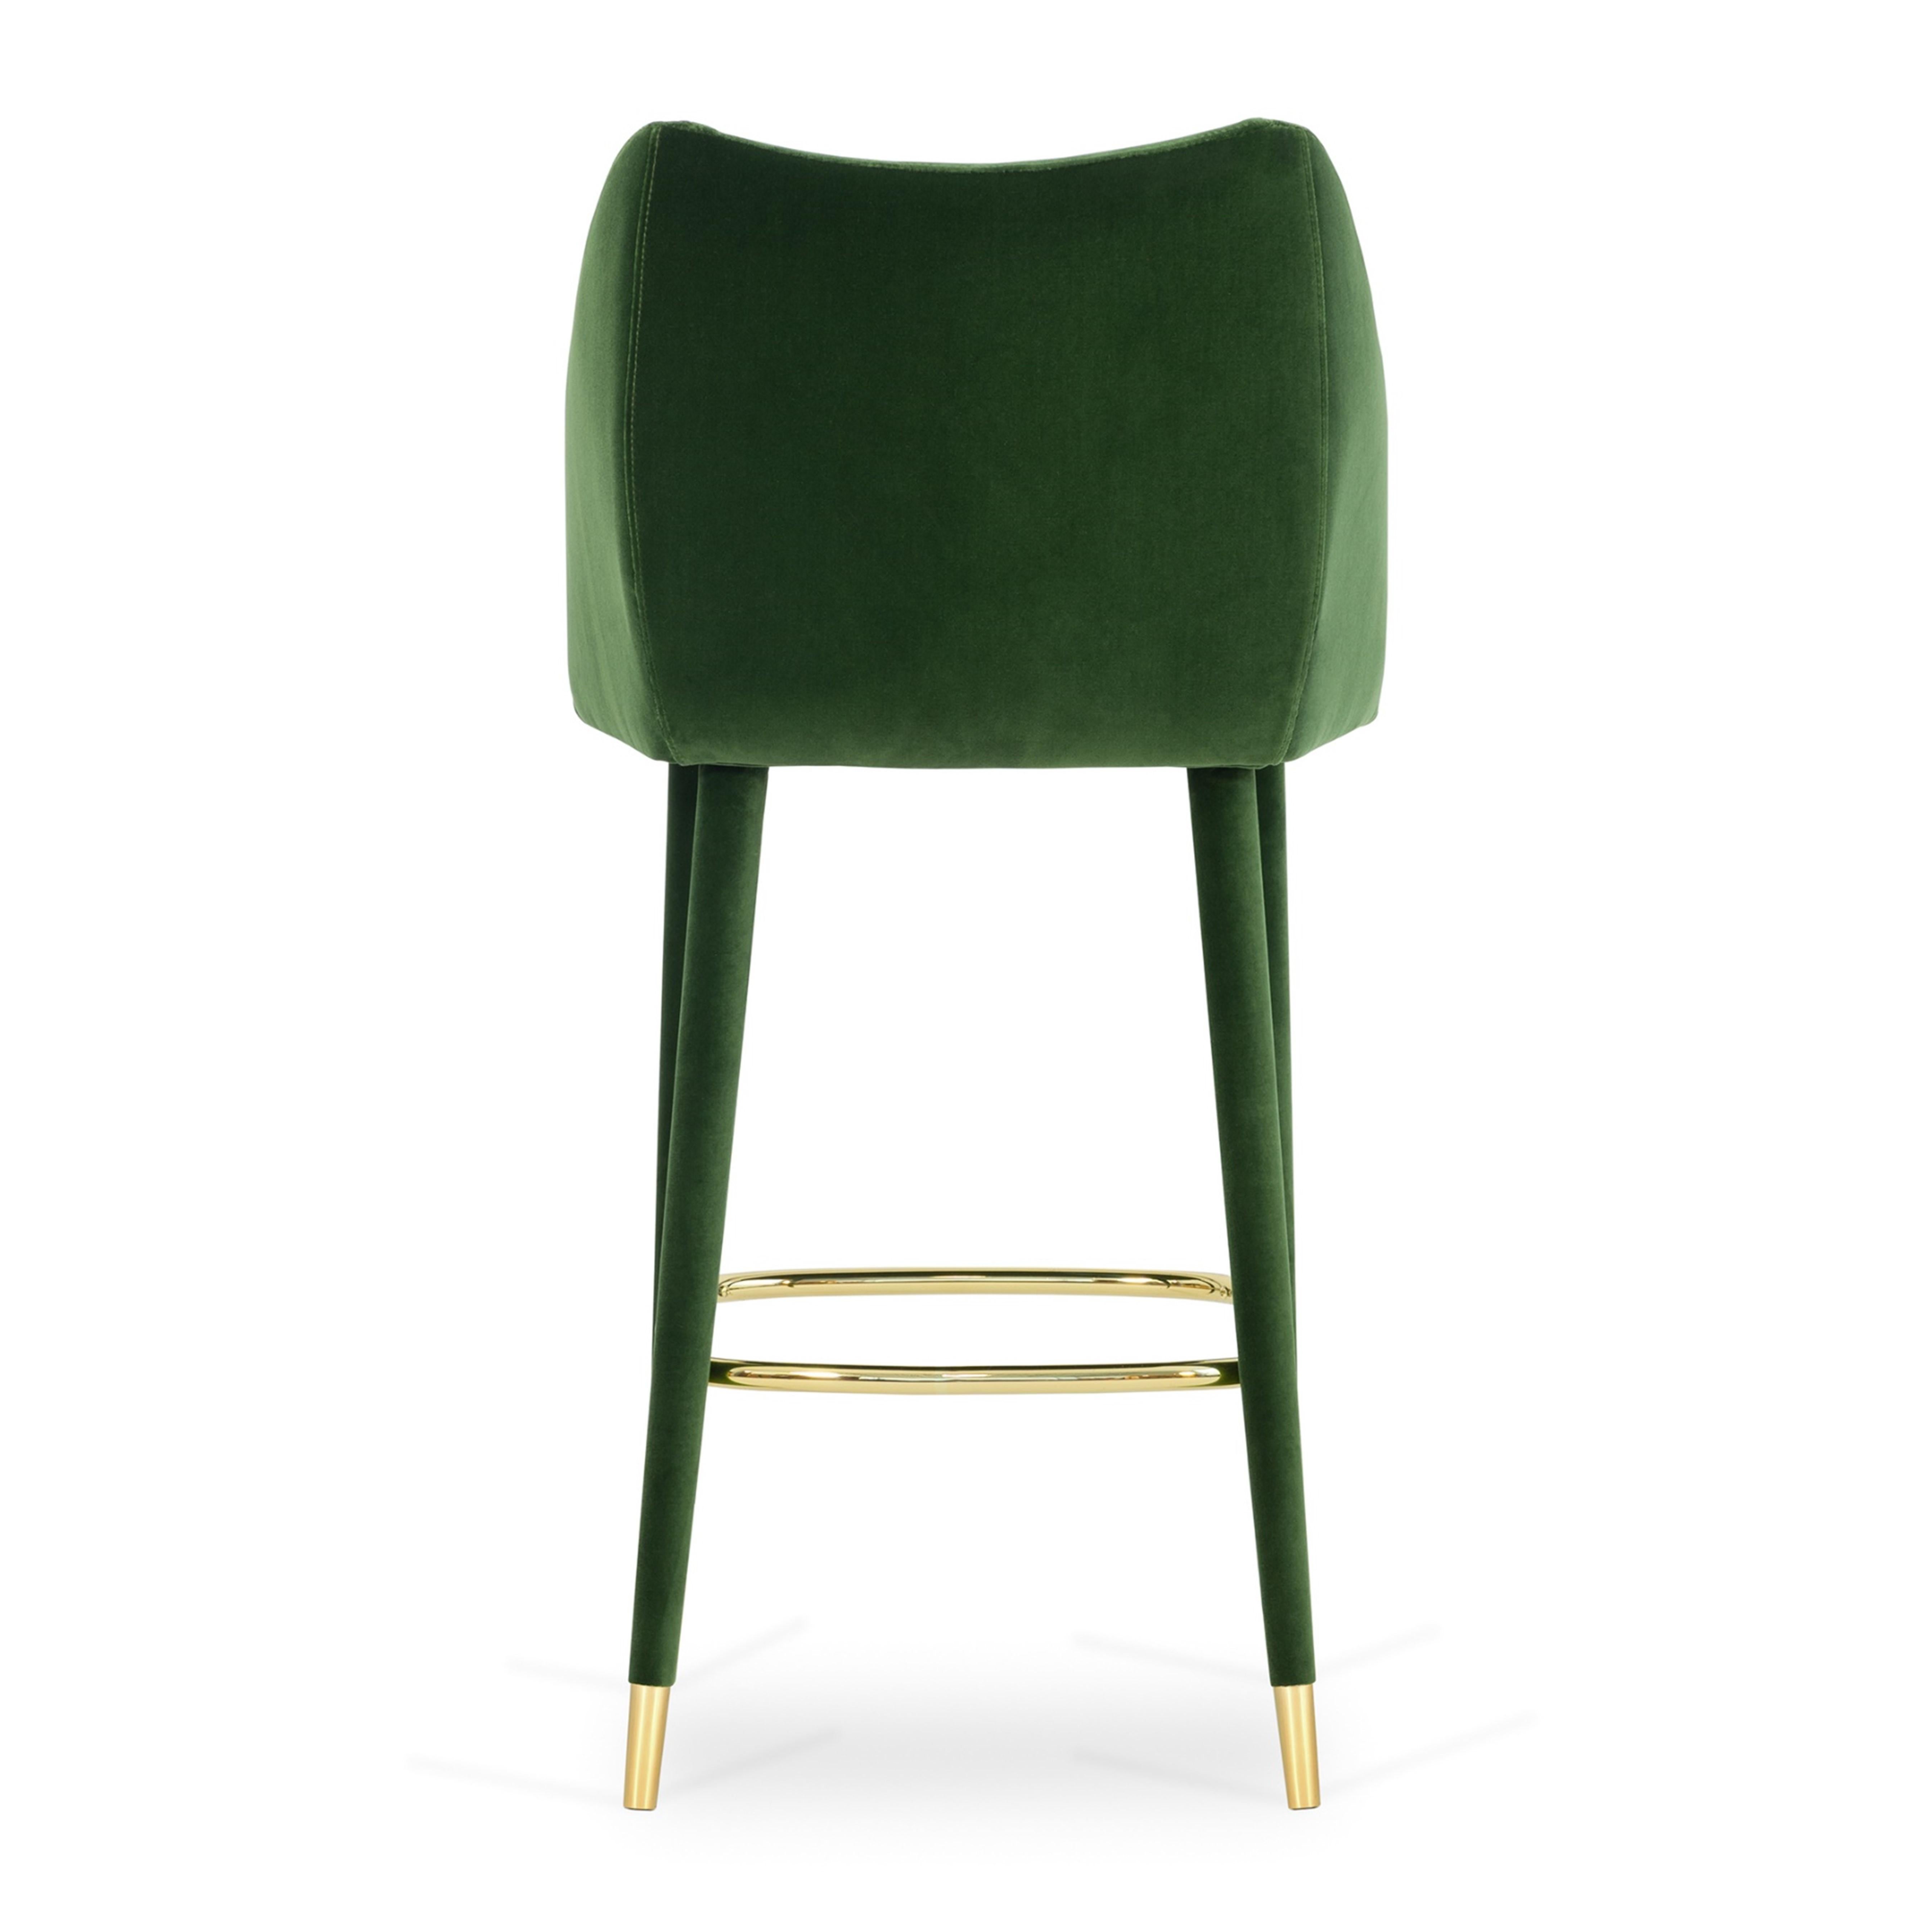 Figueroa Bar Stool, Cotton Velvet & Brass, InsidherLand by Joana Santos Barbosa In New Condition For Sale In Maia, Porto